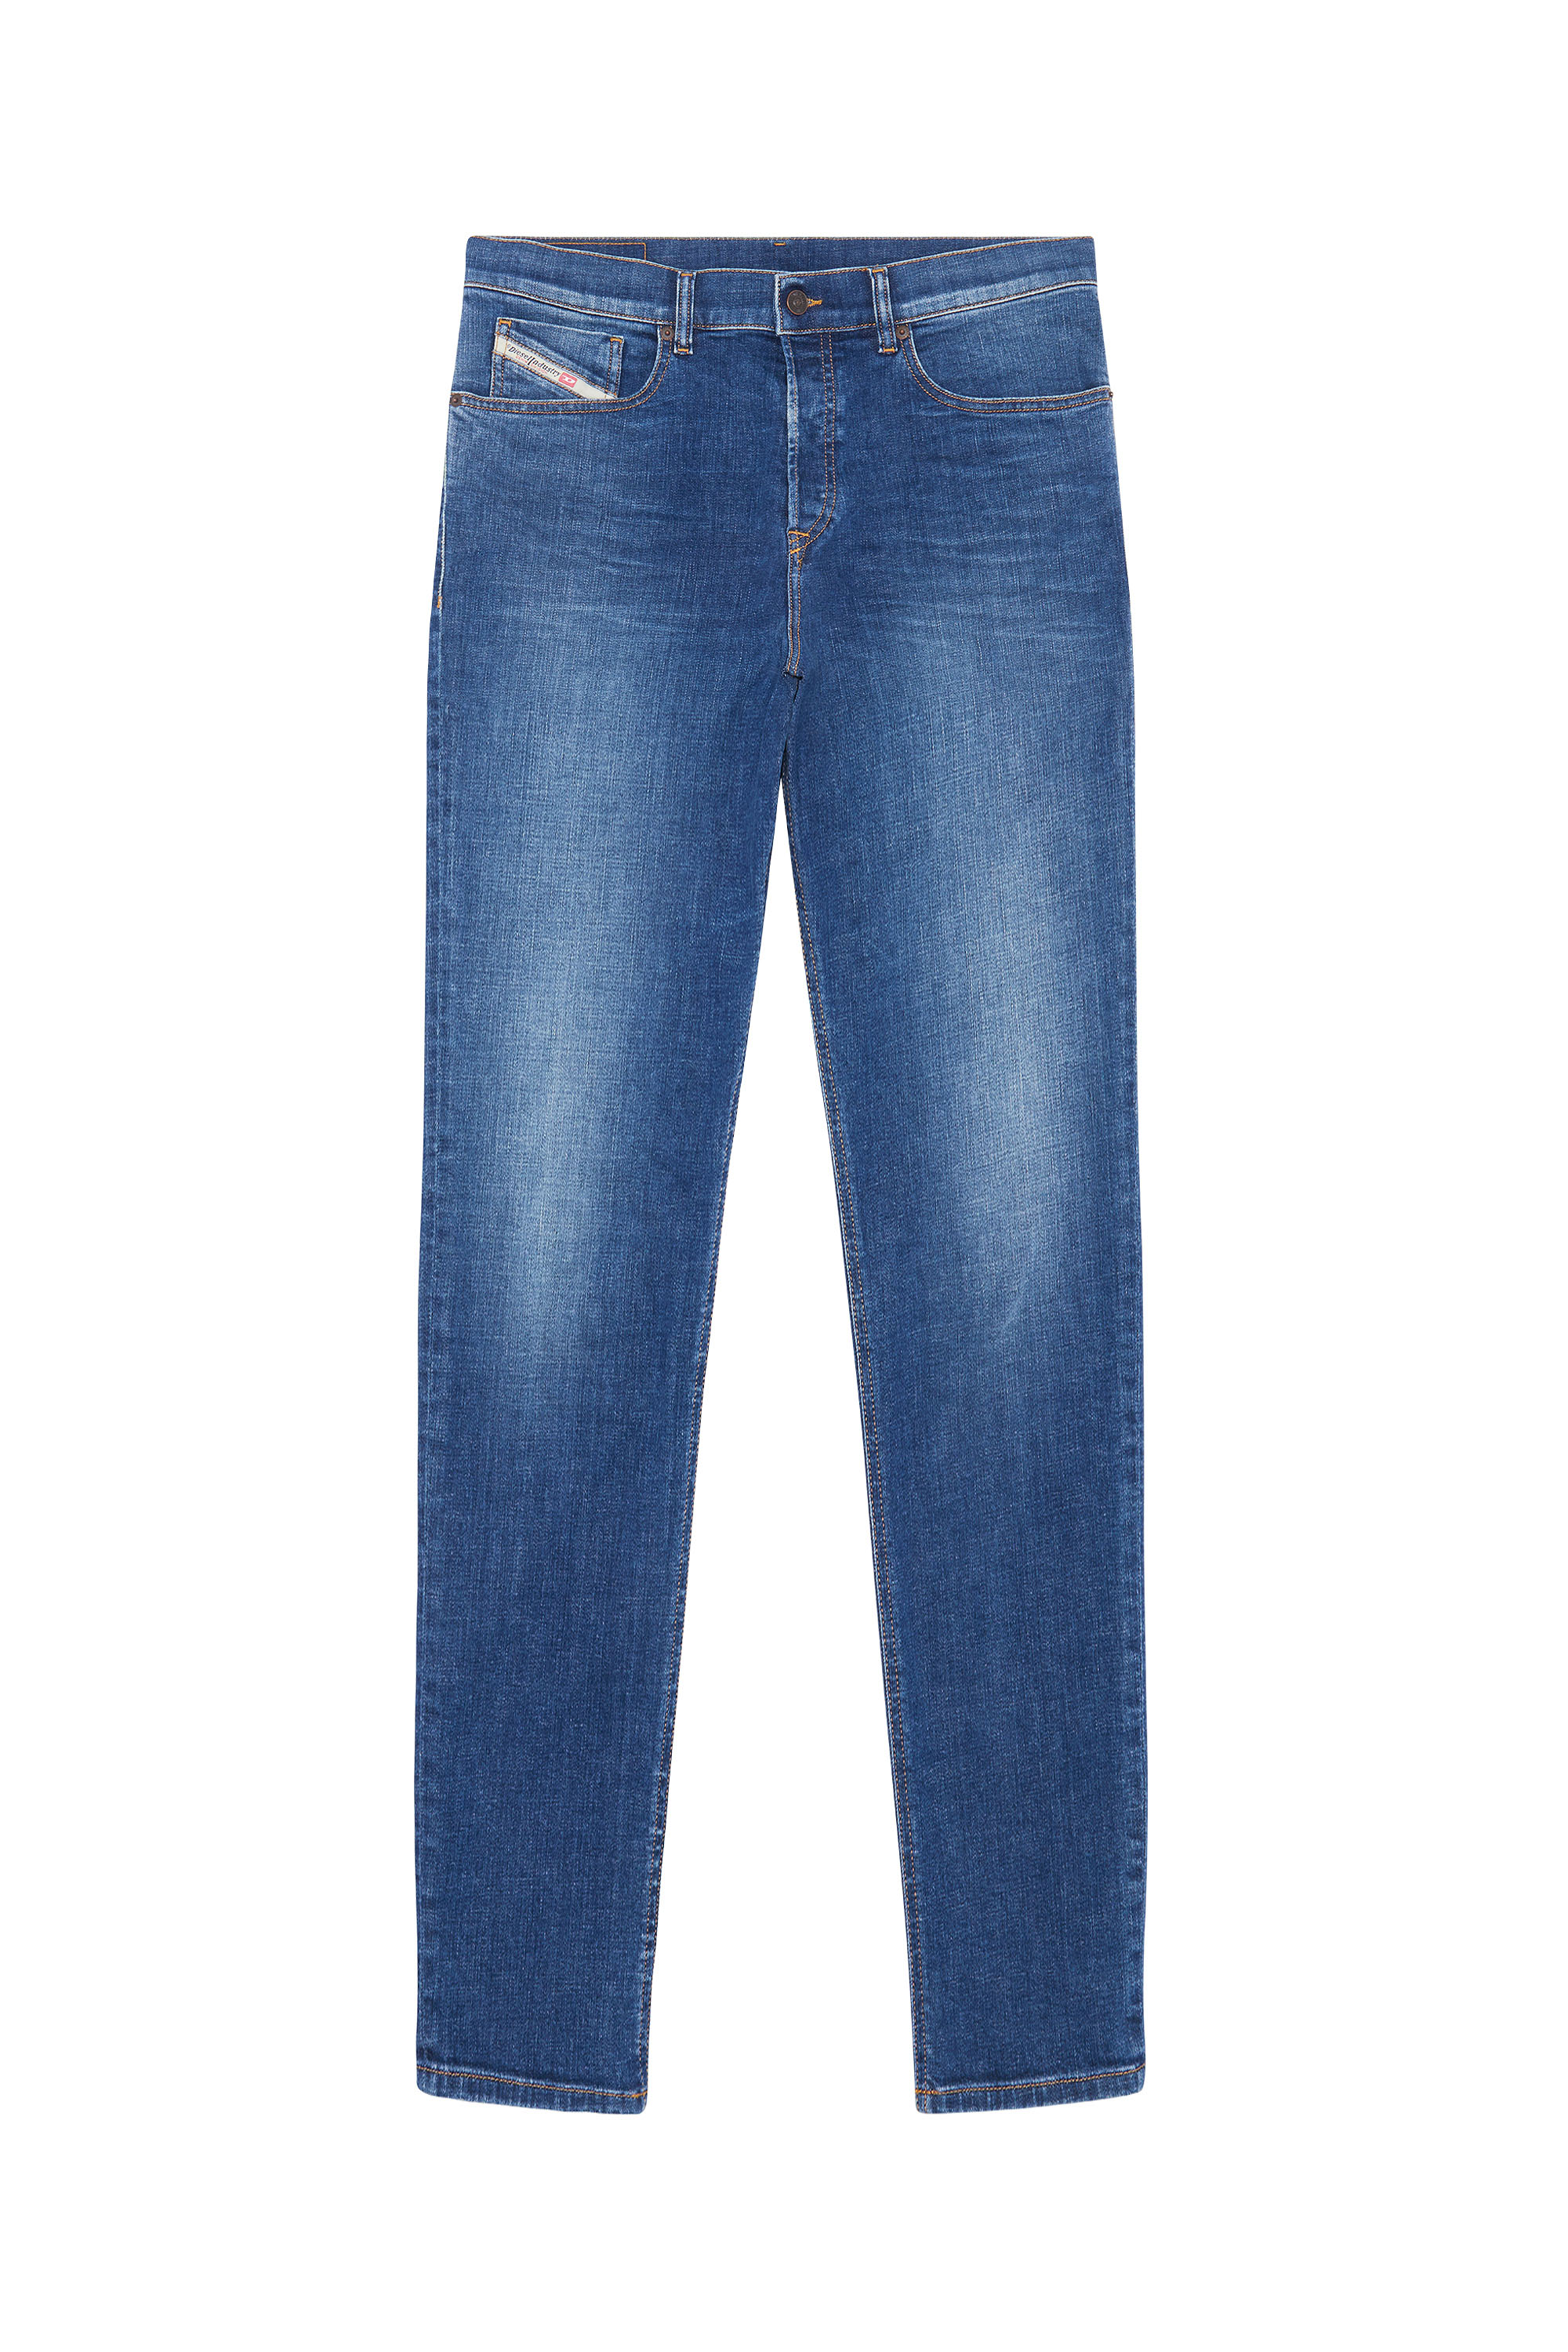 2005 D-FINING 09D46 Tapered Jeans, Blu Scuro - Jeans